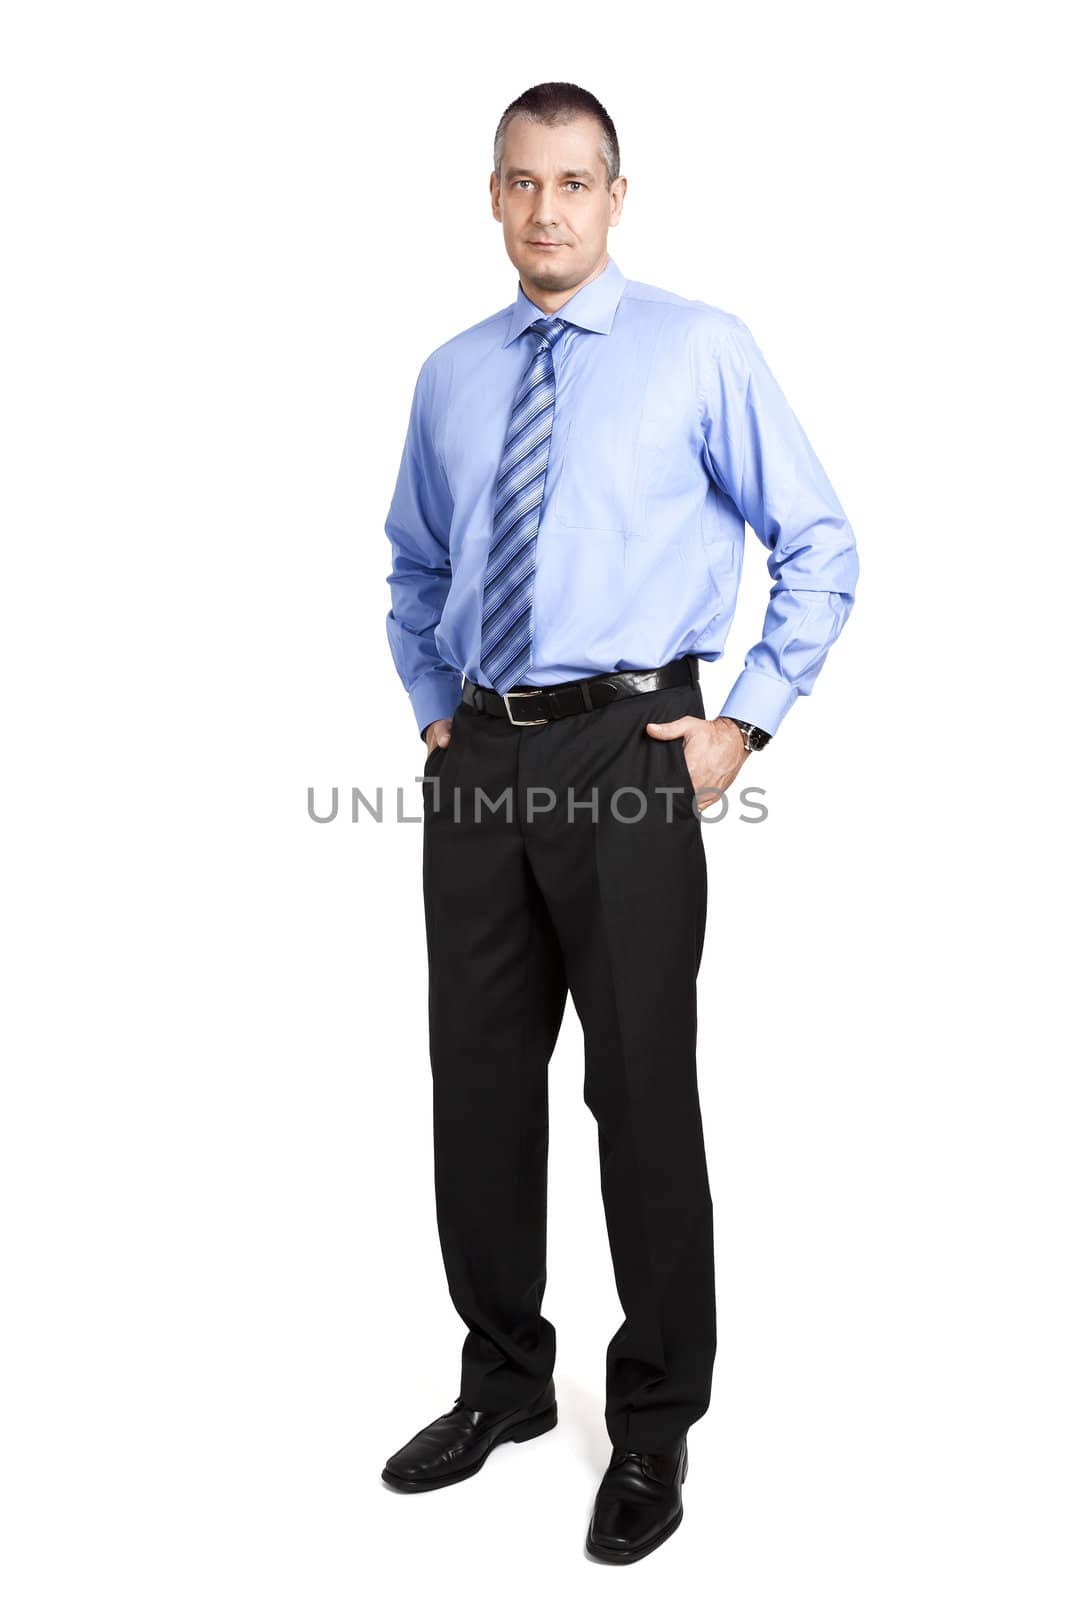 An image of a handsome business man